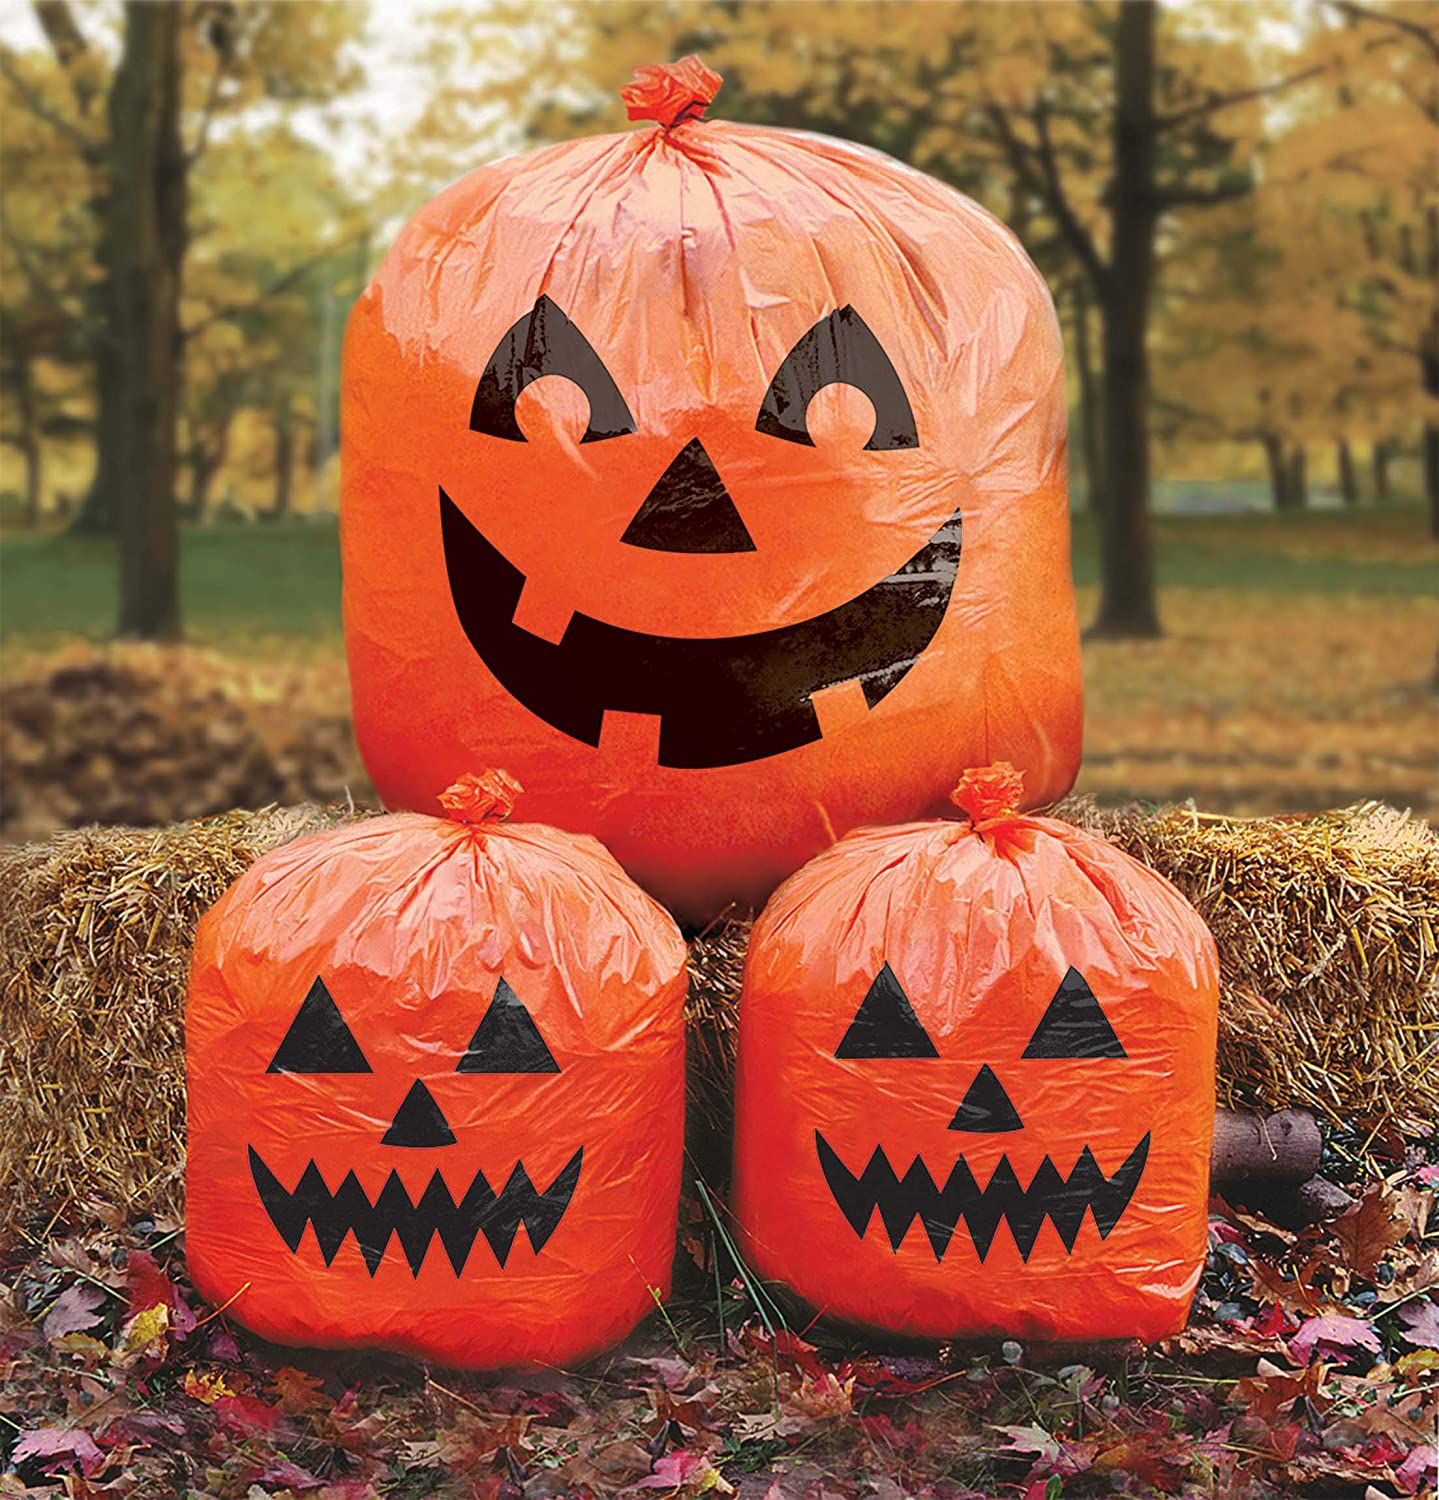 Halloween Party Decorations Halloween Pumpkin Decoration Stakes Kit Lawn Haunted House decorations Outdoor for Halloween Decorations 4 Sets 